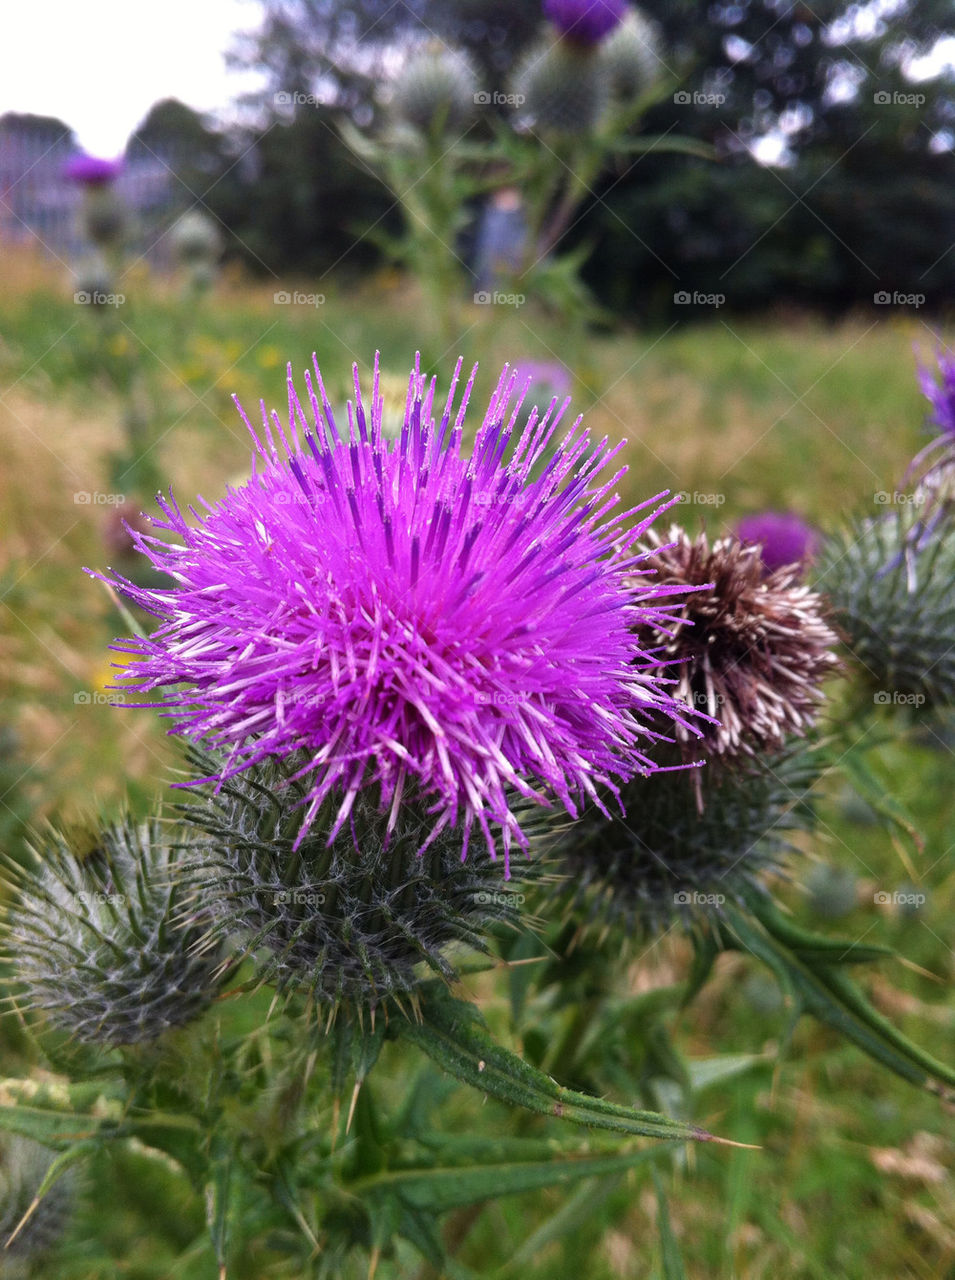 flower weed purple thistle by emmam